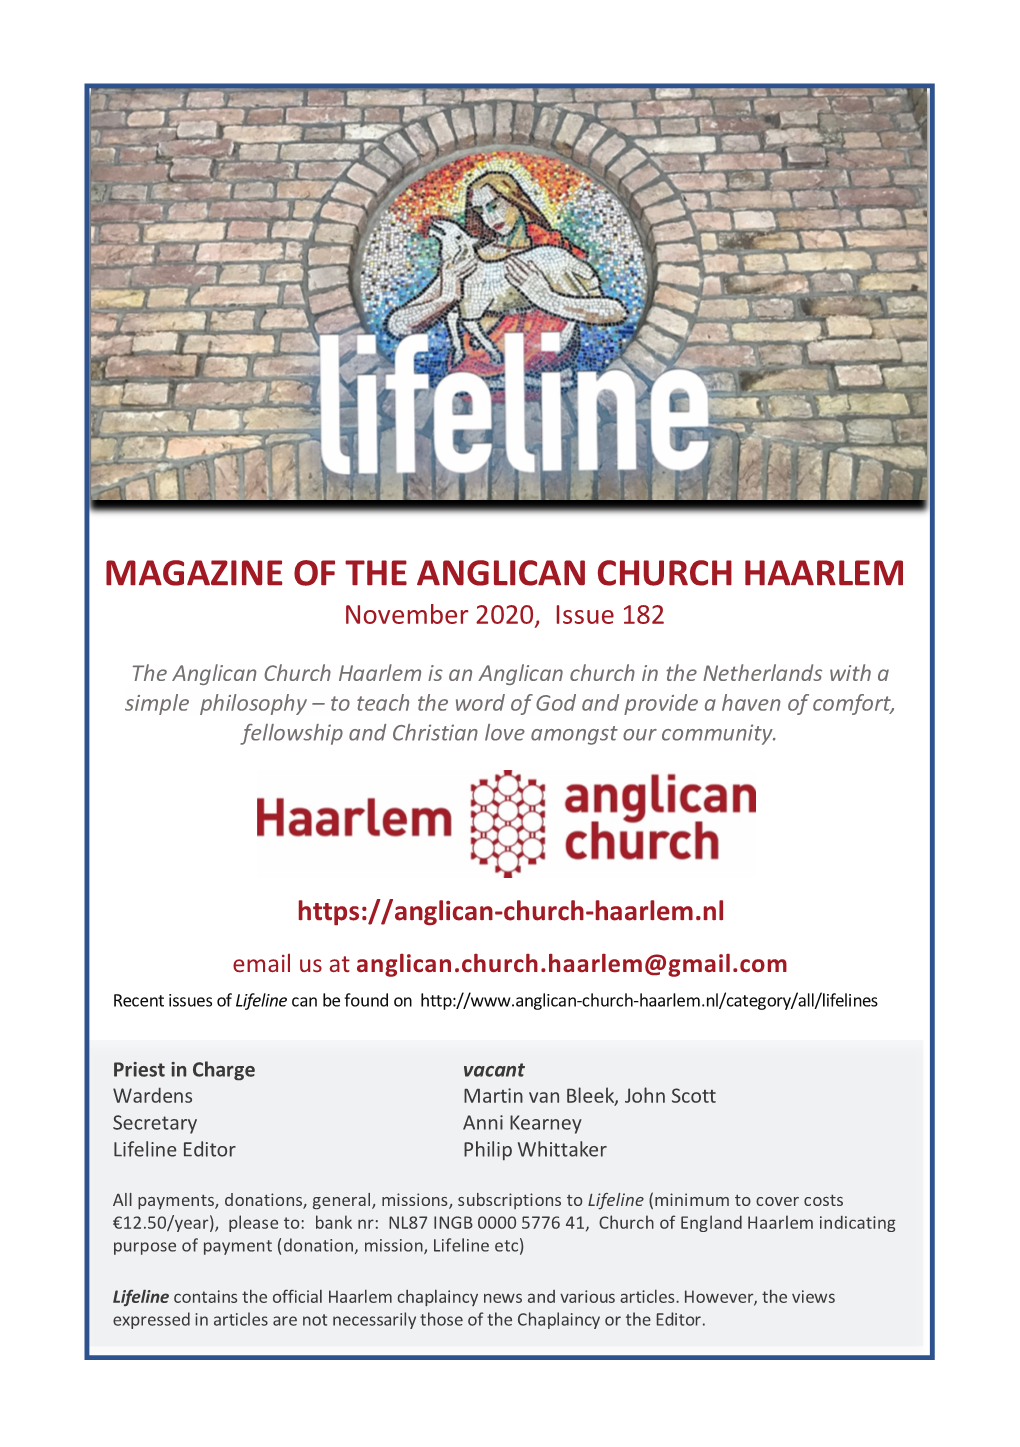 MAGAZINE of the ANGLICAN CHURCH HAARLEM November 2020, Issue 182